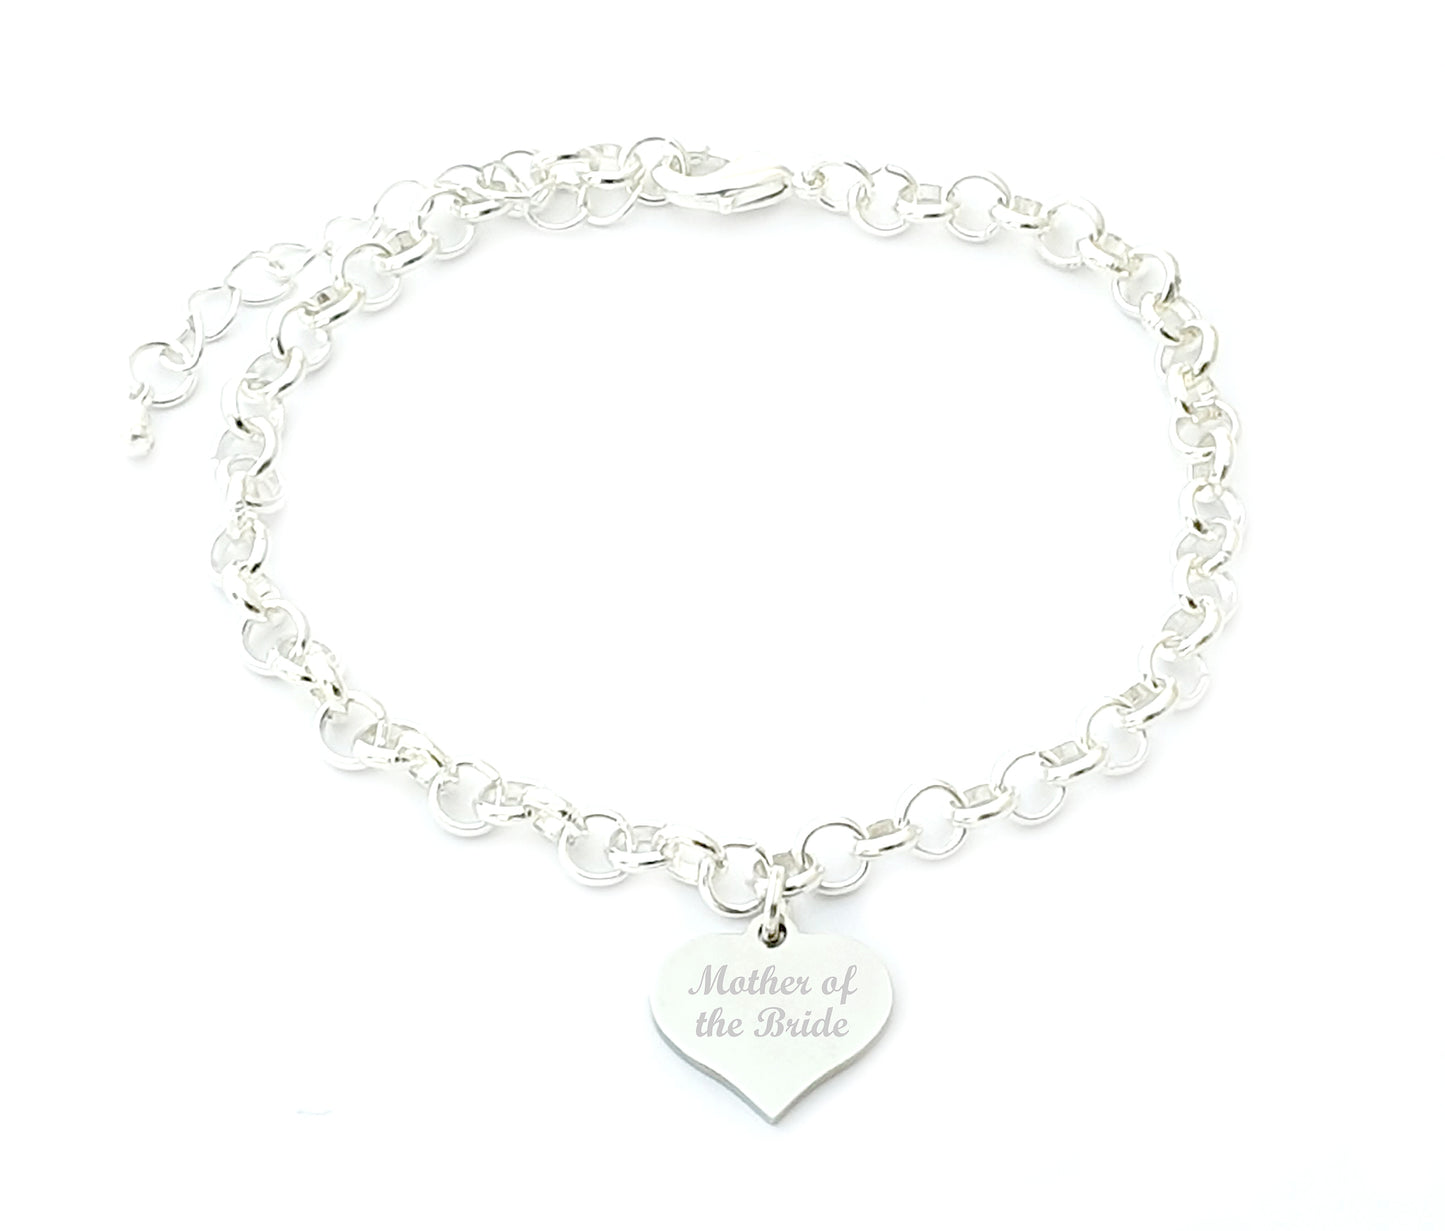 Mother of the Bride Engraved Heart Link Bracelet Wedding Gift for Women, Message Jewellery